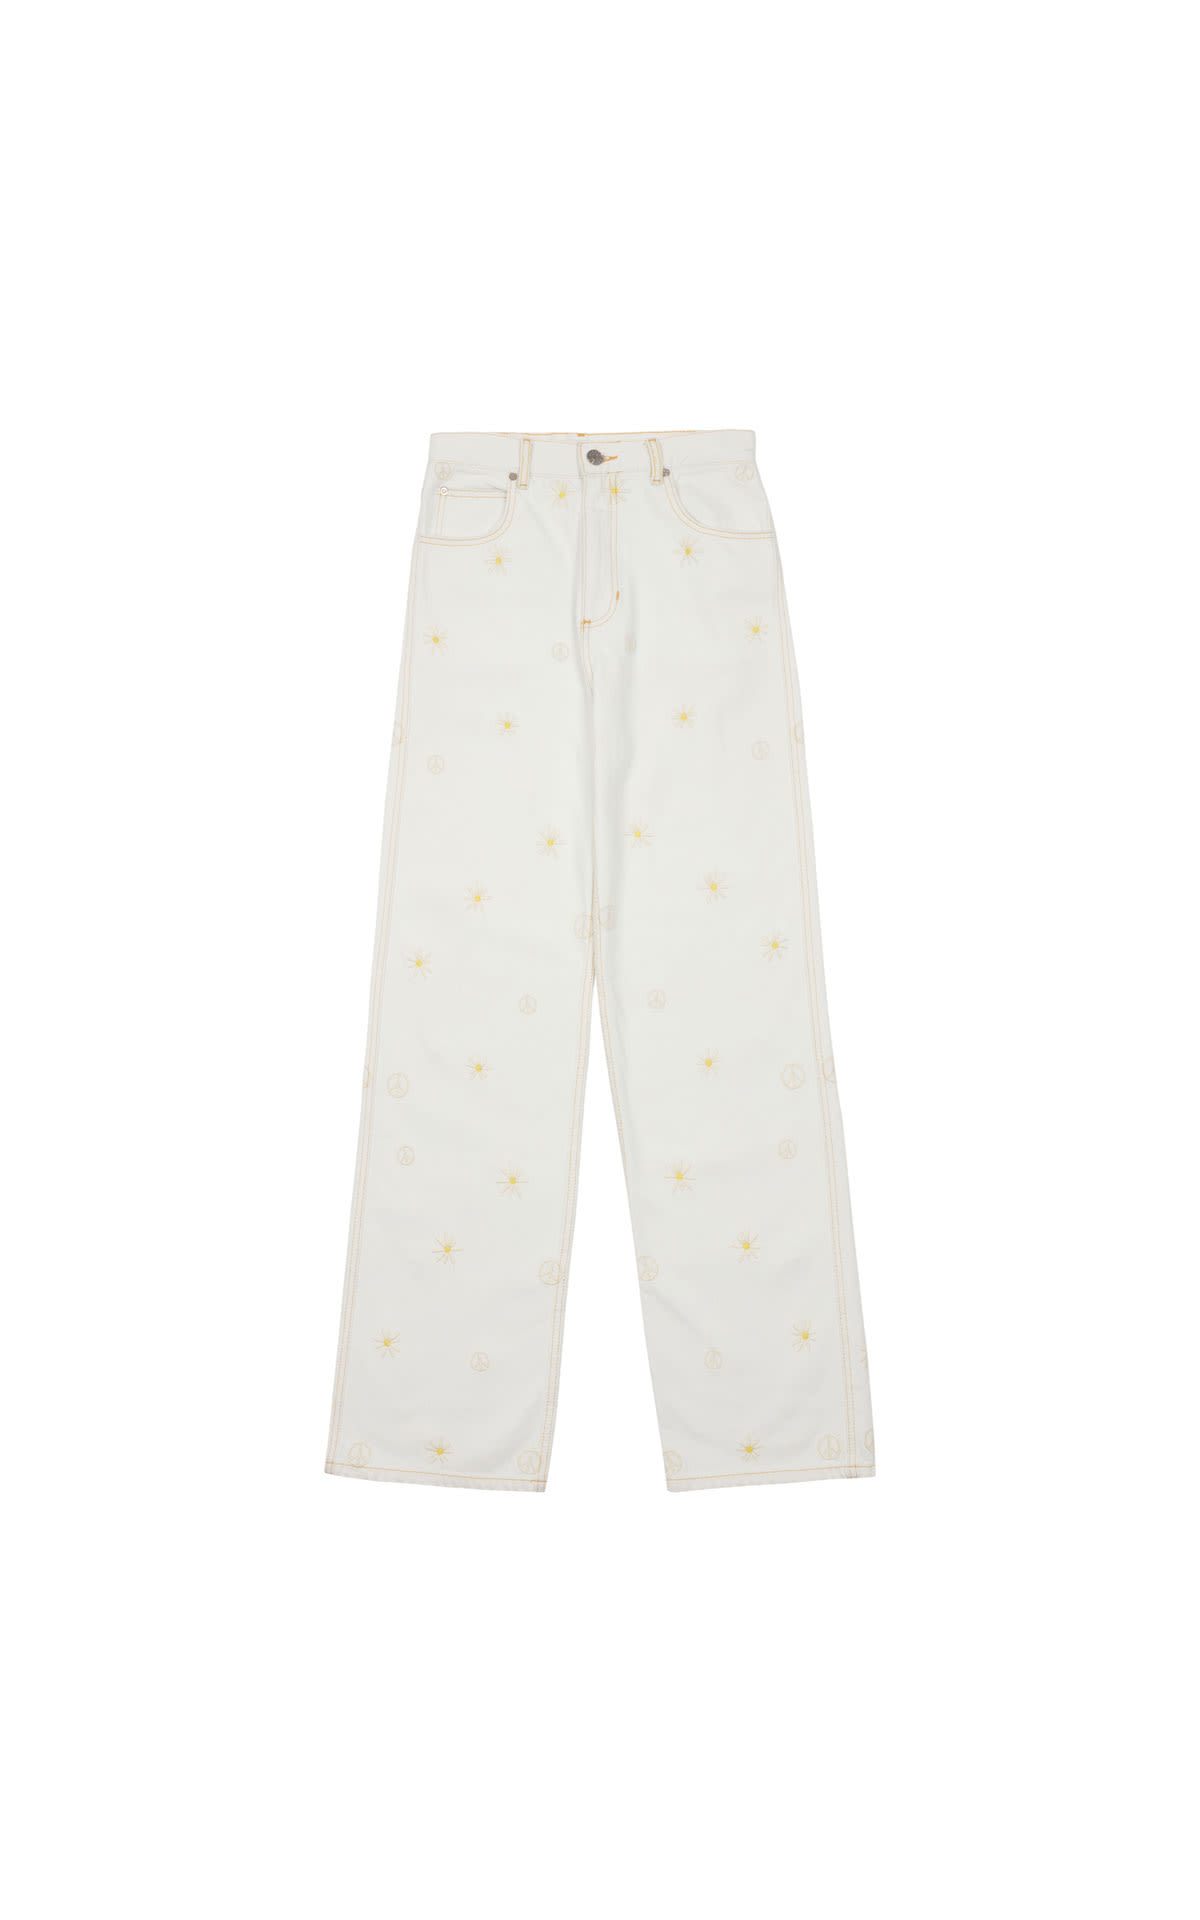 Sandro Printed jeans from Bicester Village